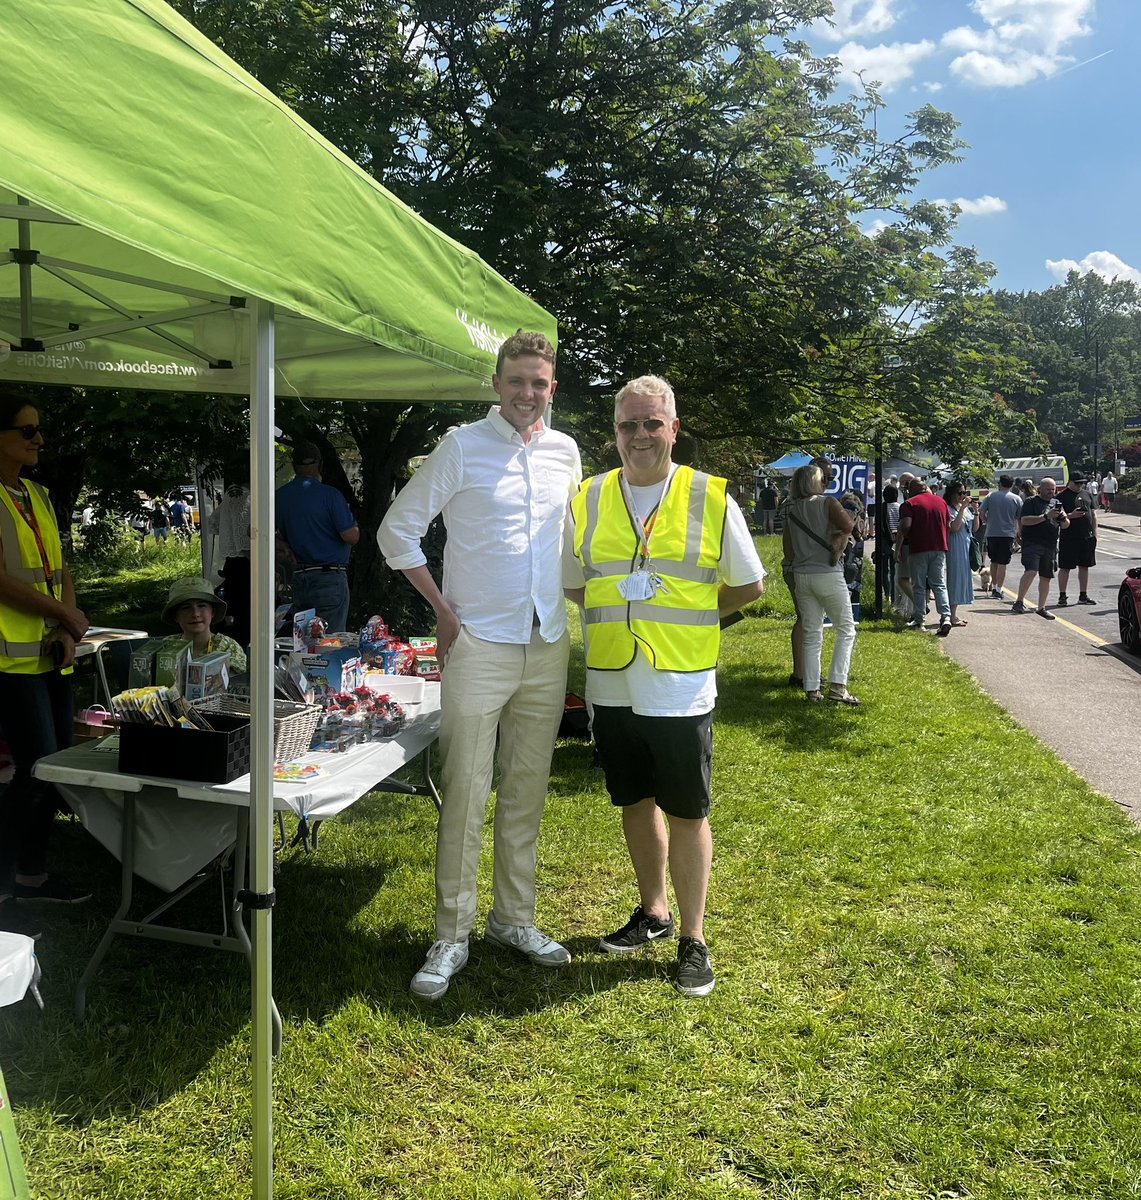 What a lovely afternoon in the sun at the Chislehurst Car Show - great to see so many people there. Good to catch up with @MikeJackBR7 and @VisitChis - well done to everyone involved with putting today together!